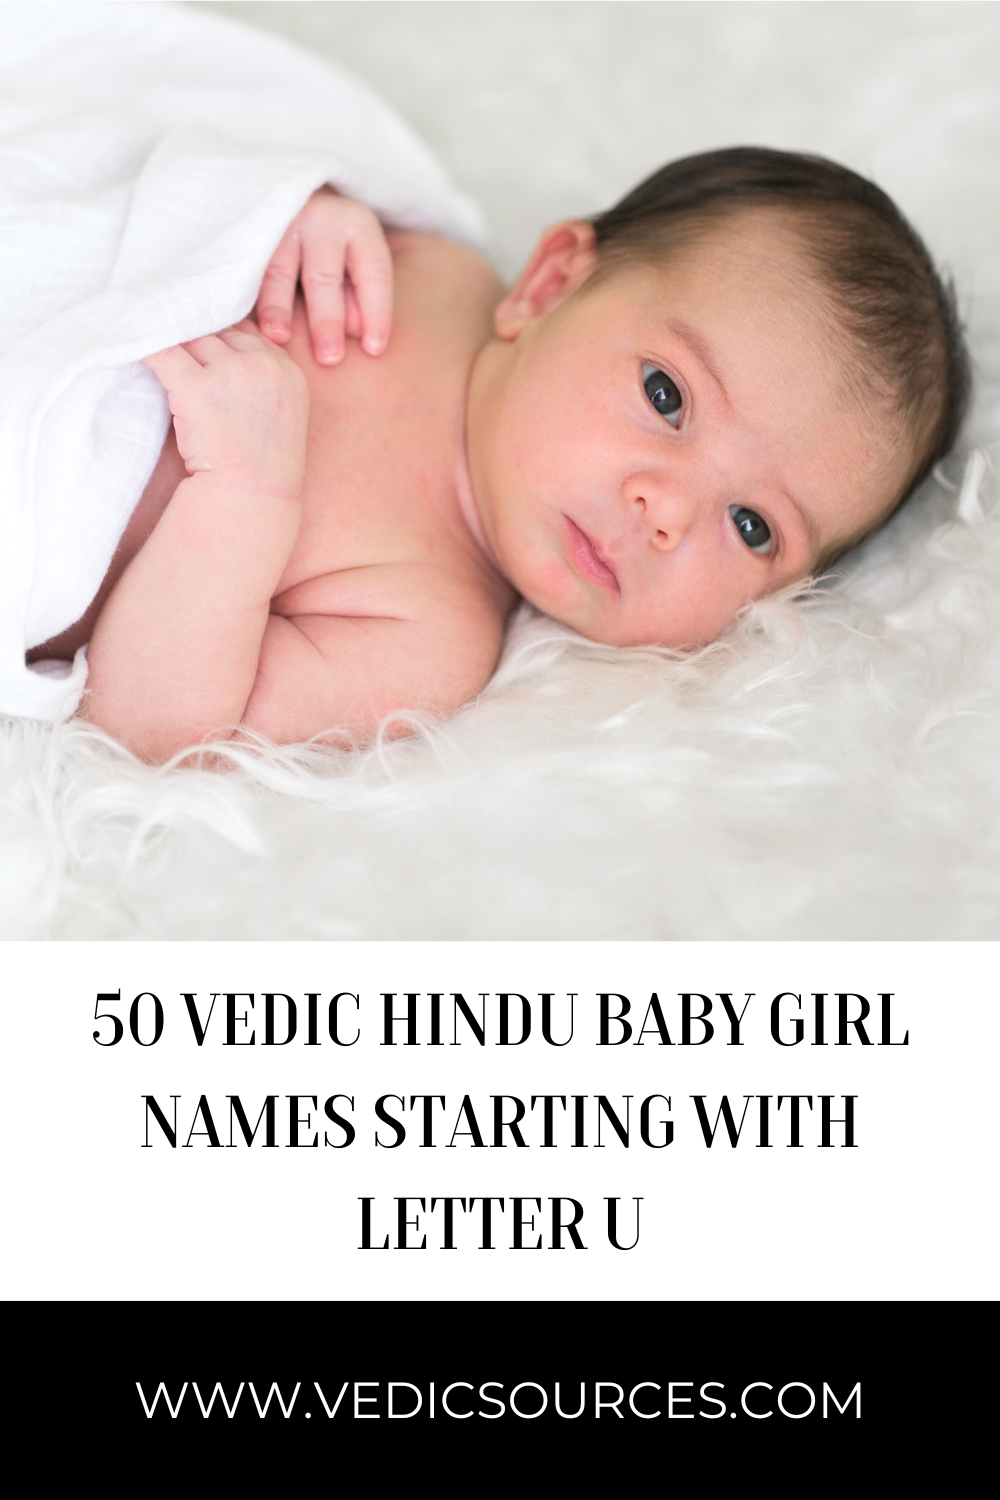 50 Vedic Hindu Baby Girl Names Starting with Letter U